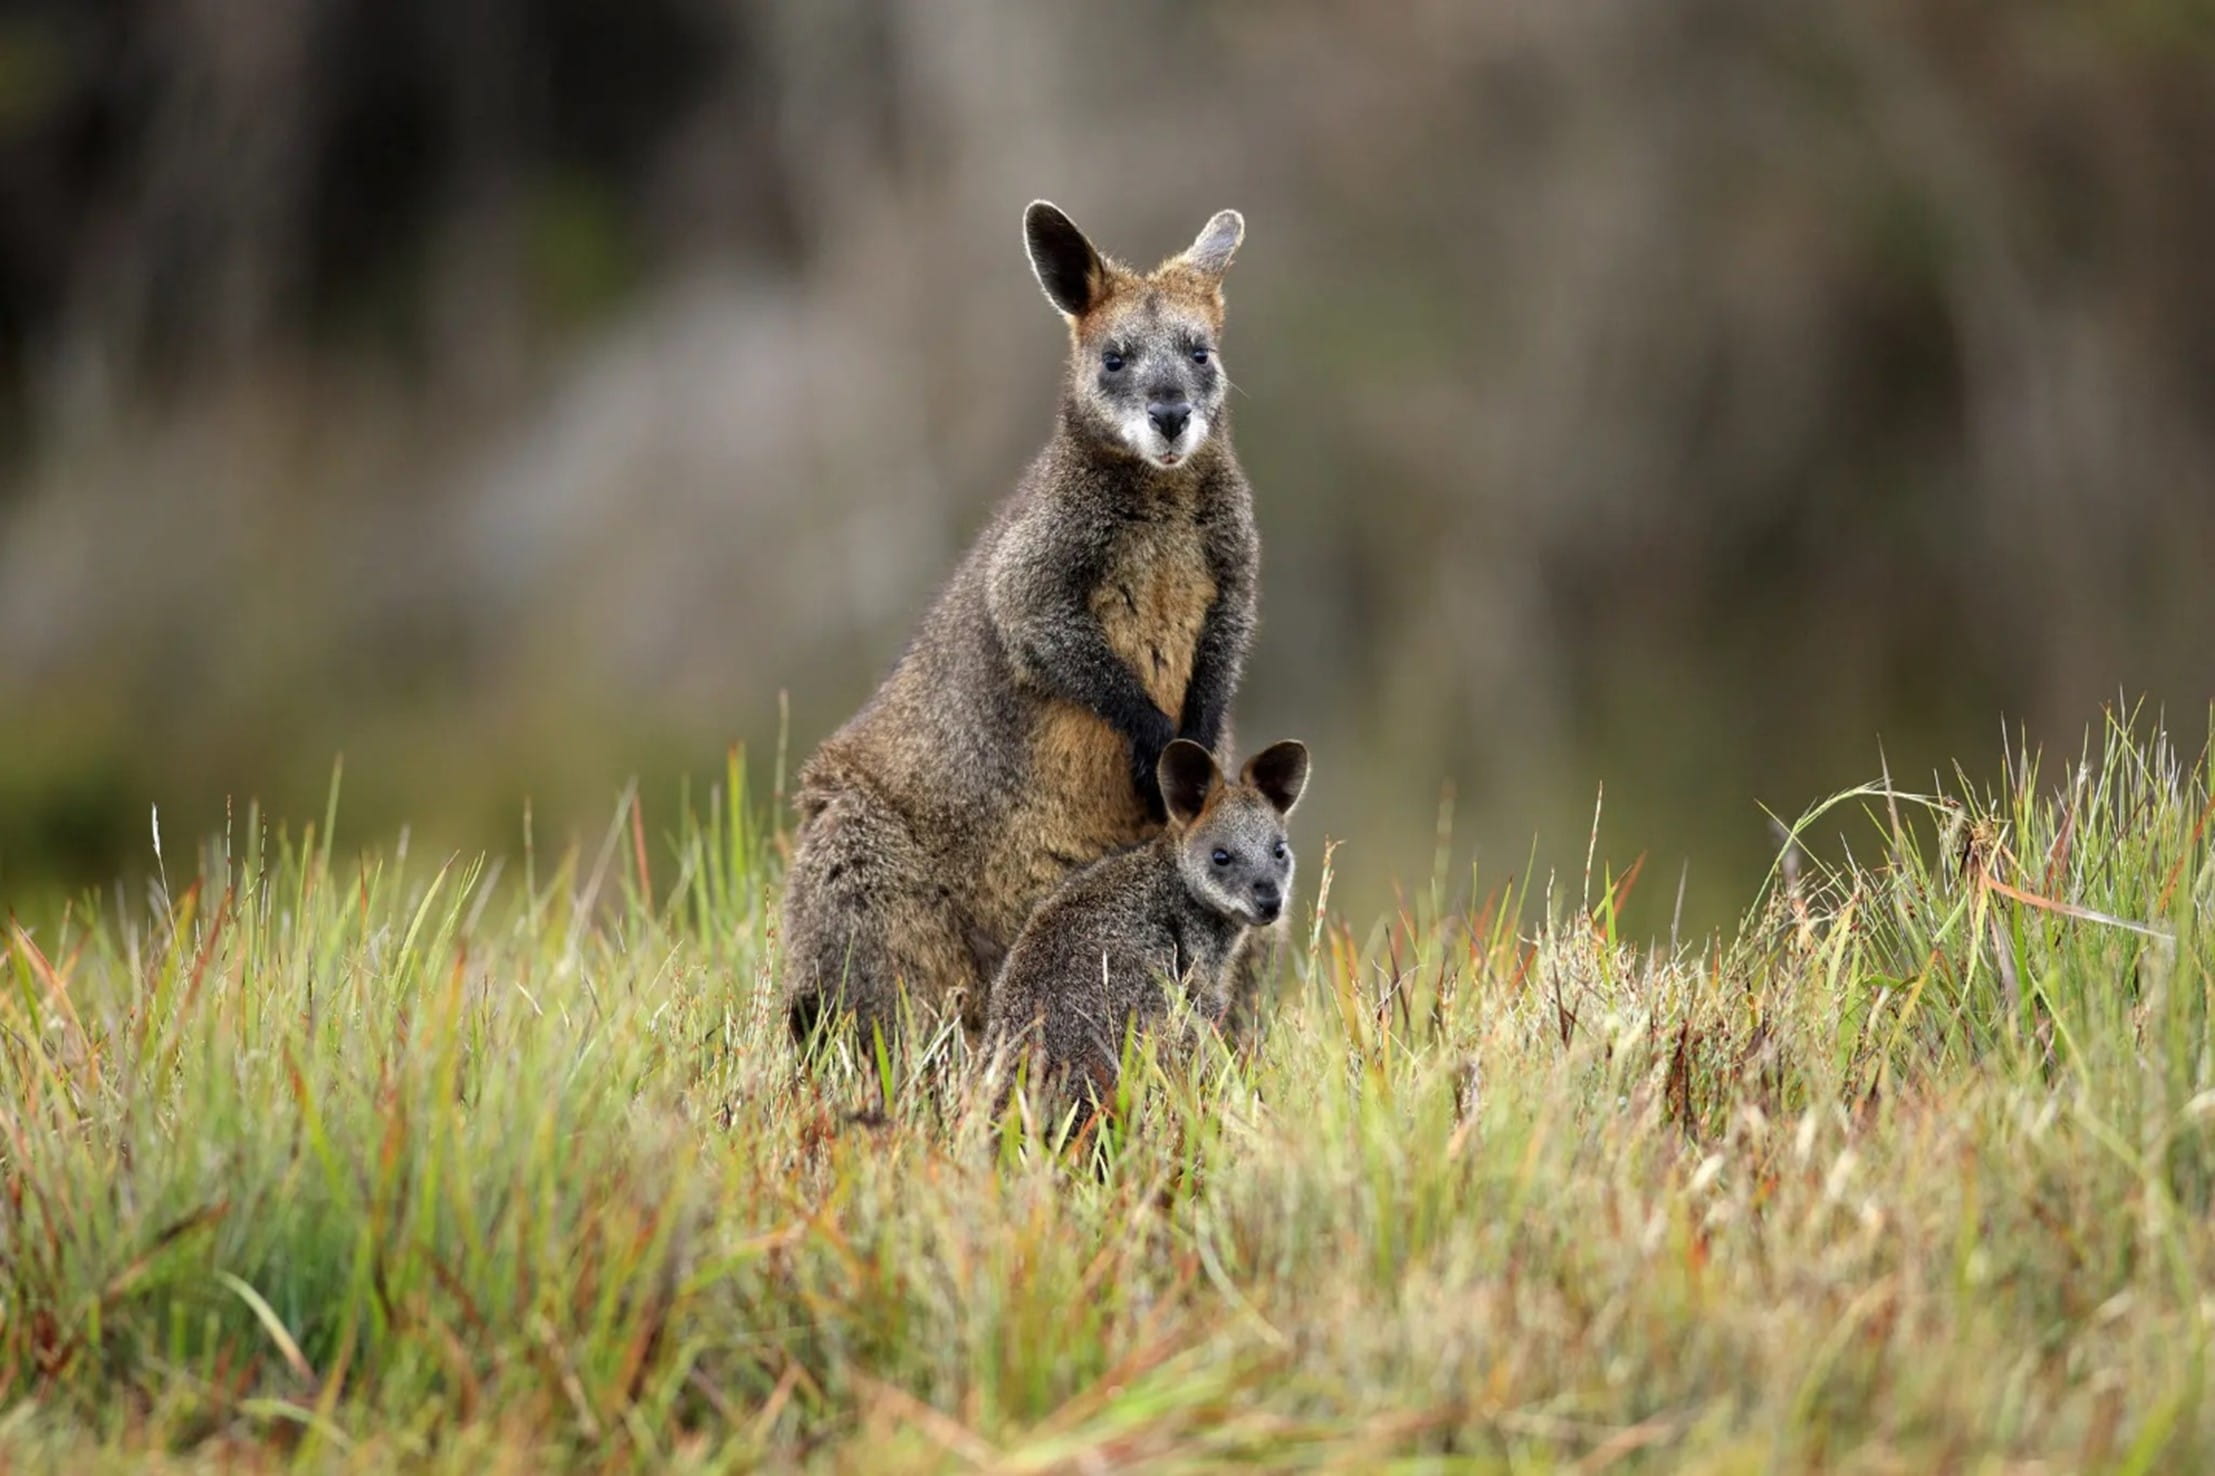 A mother wallaby and its joey are in a field of grass